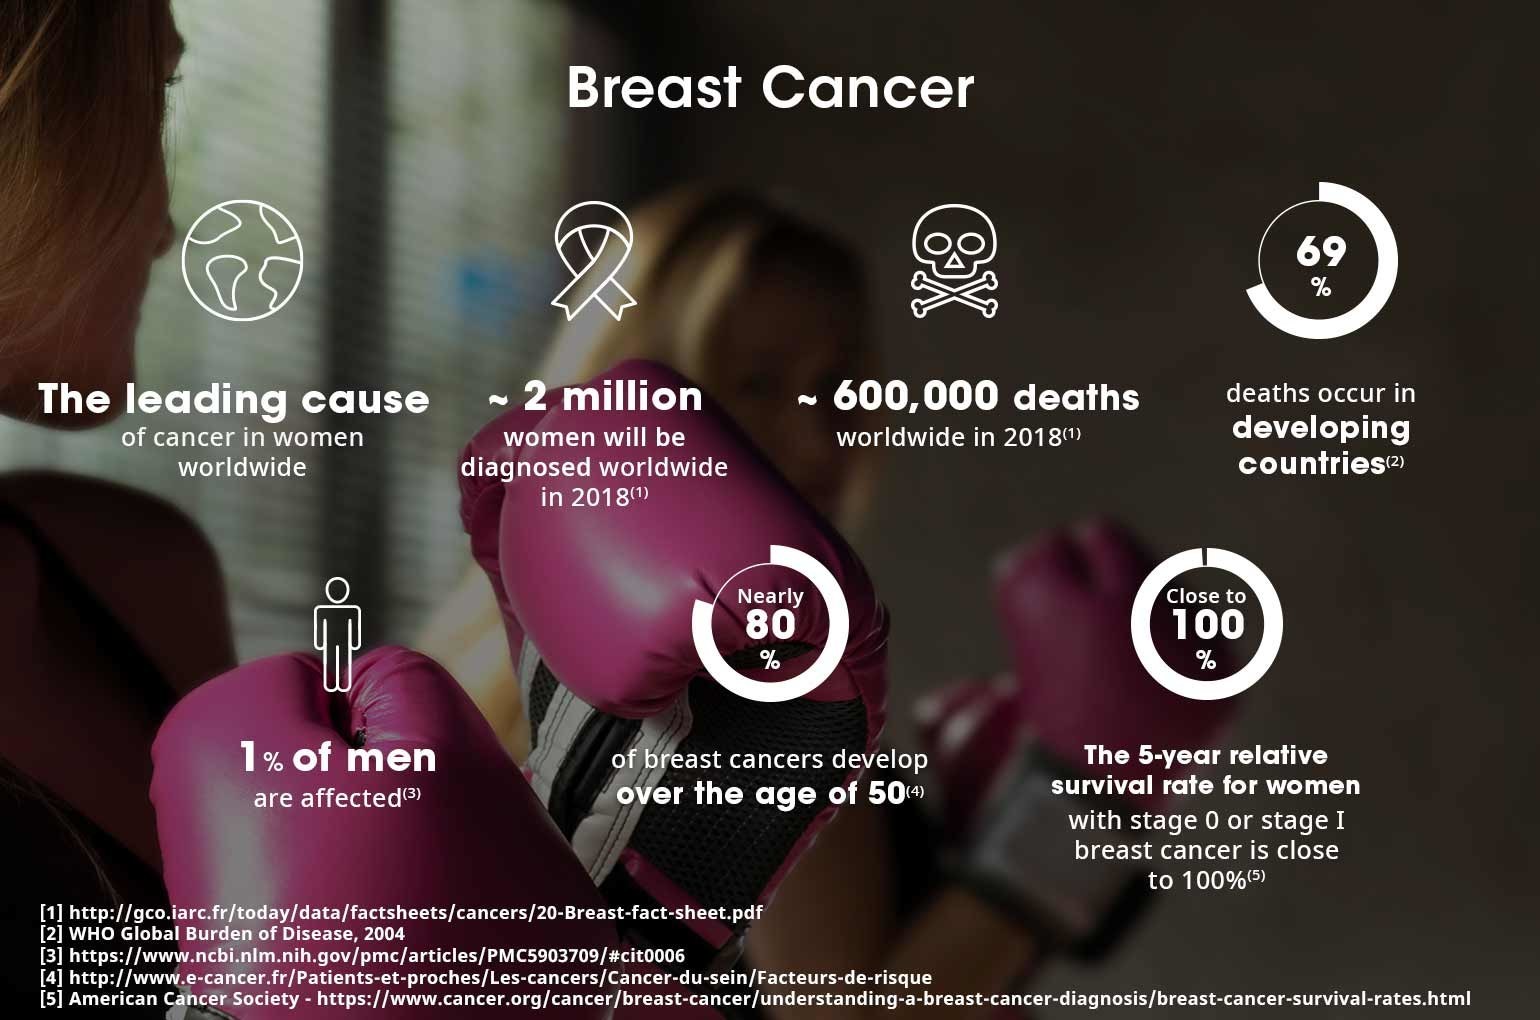 Recent advances in the battle against breast cancer - PreScouter